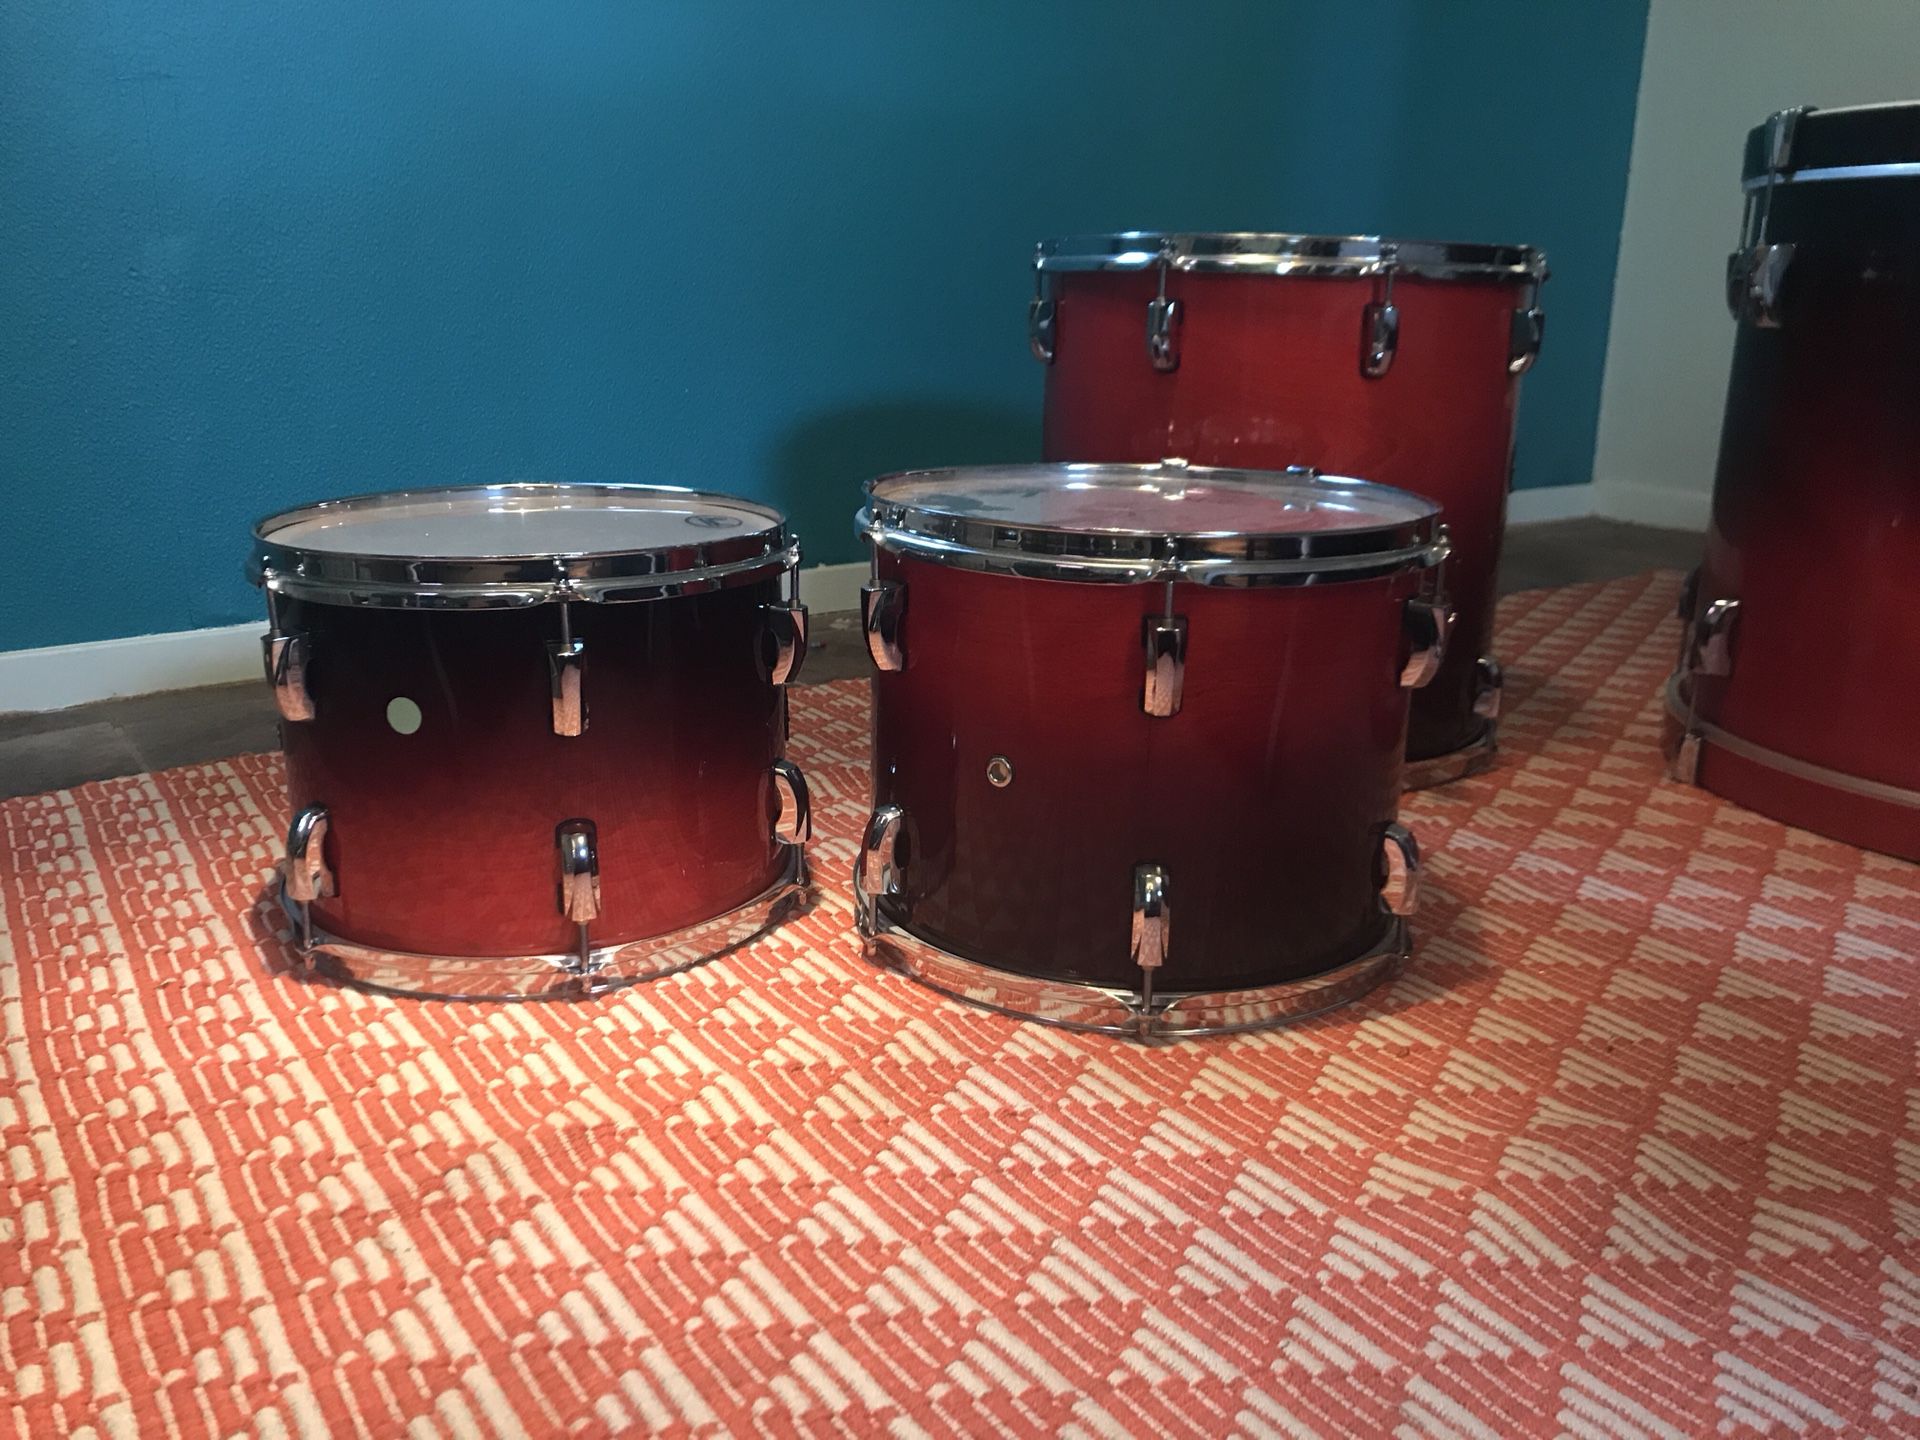 Brand new, never used Pearl Drum set with custom red fade paint job. In perfect condition and looking for a new home ✨😋